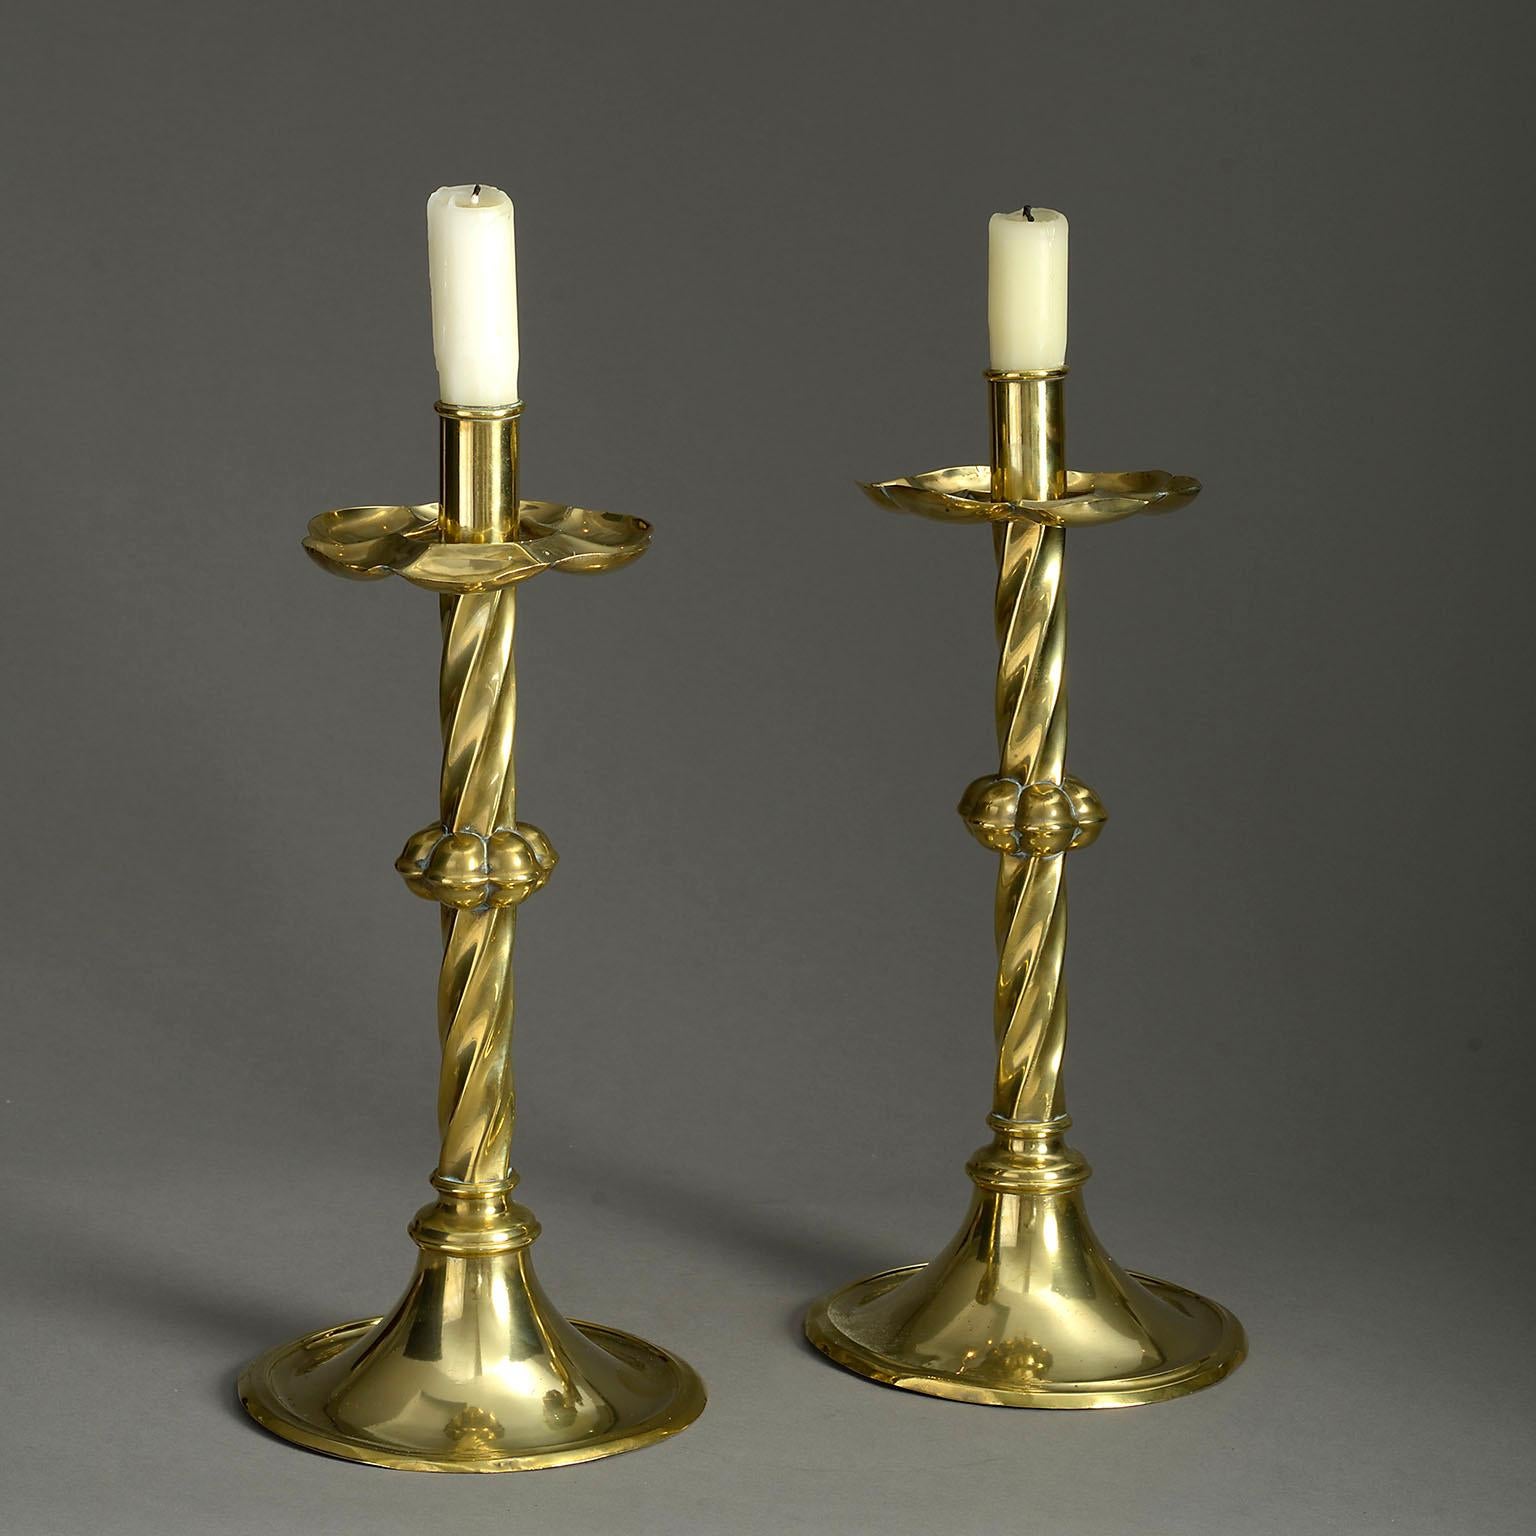 Early Victorian Tall Pair of Mid-19th Century Victorian Brass Candlesticks